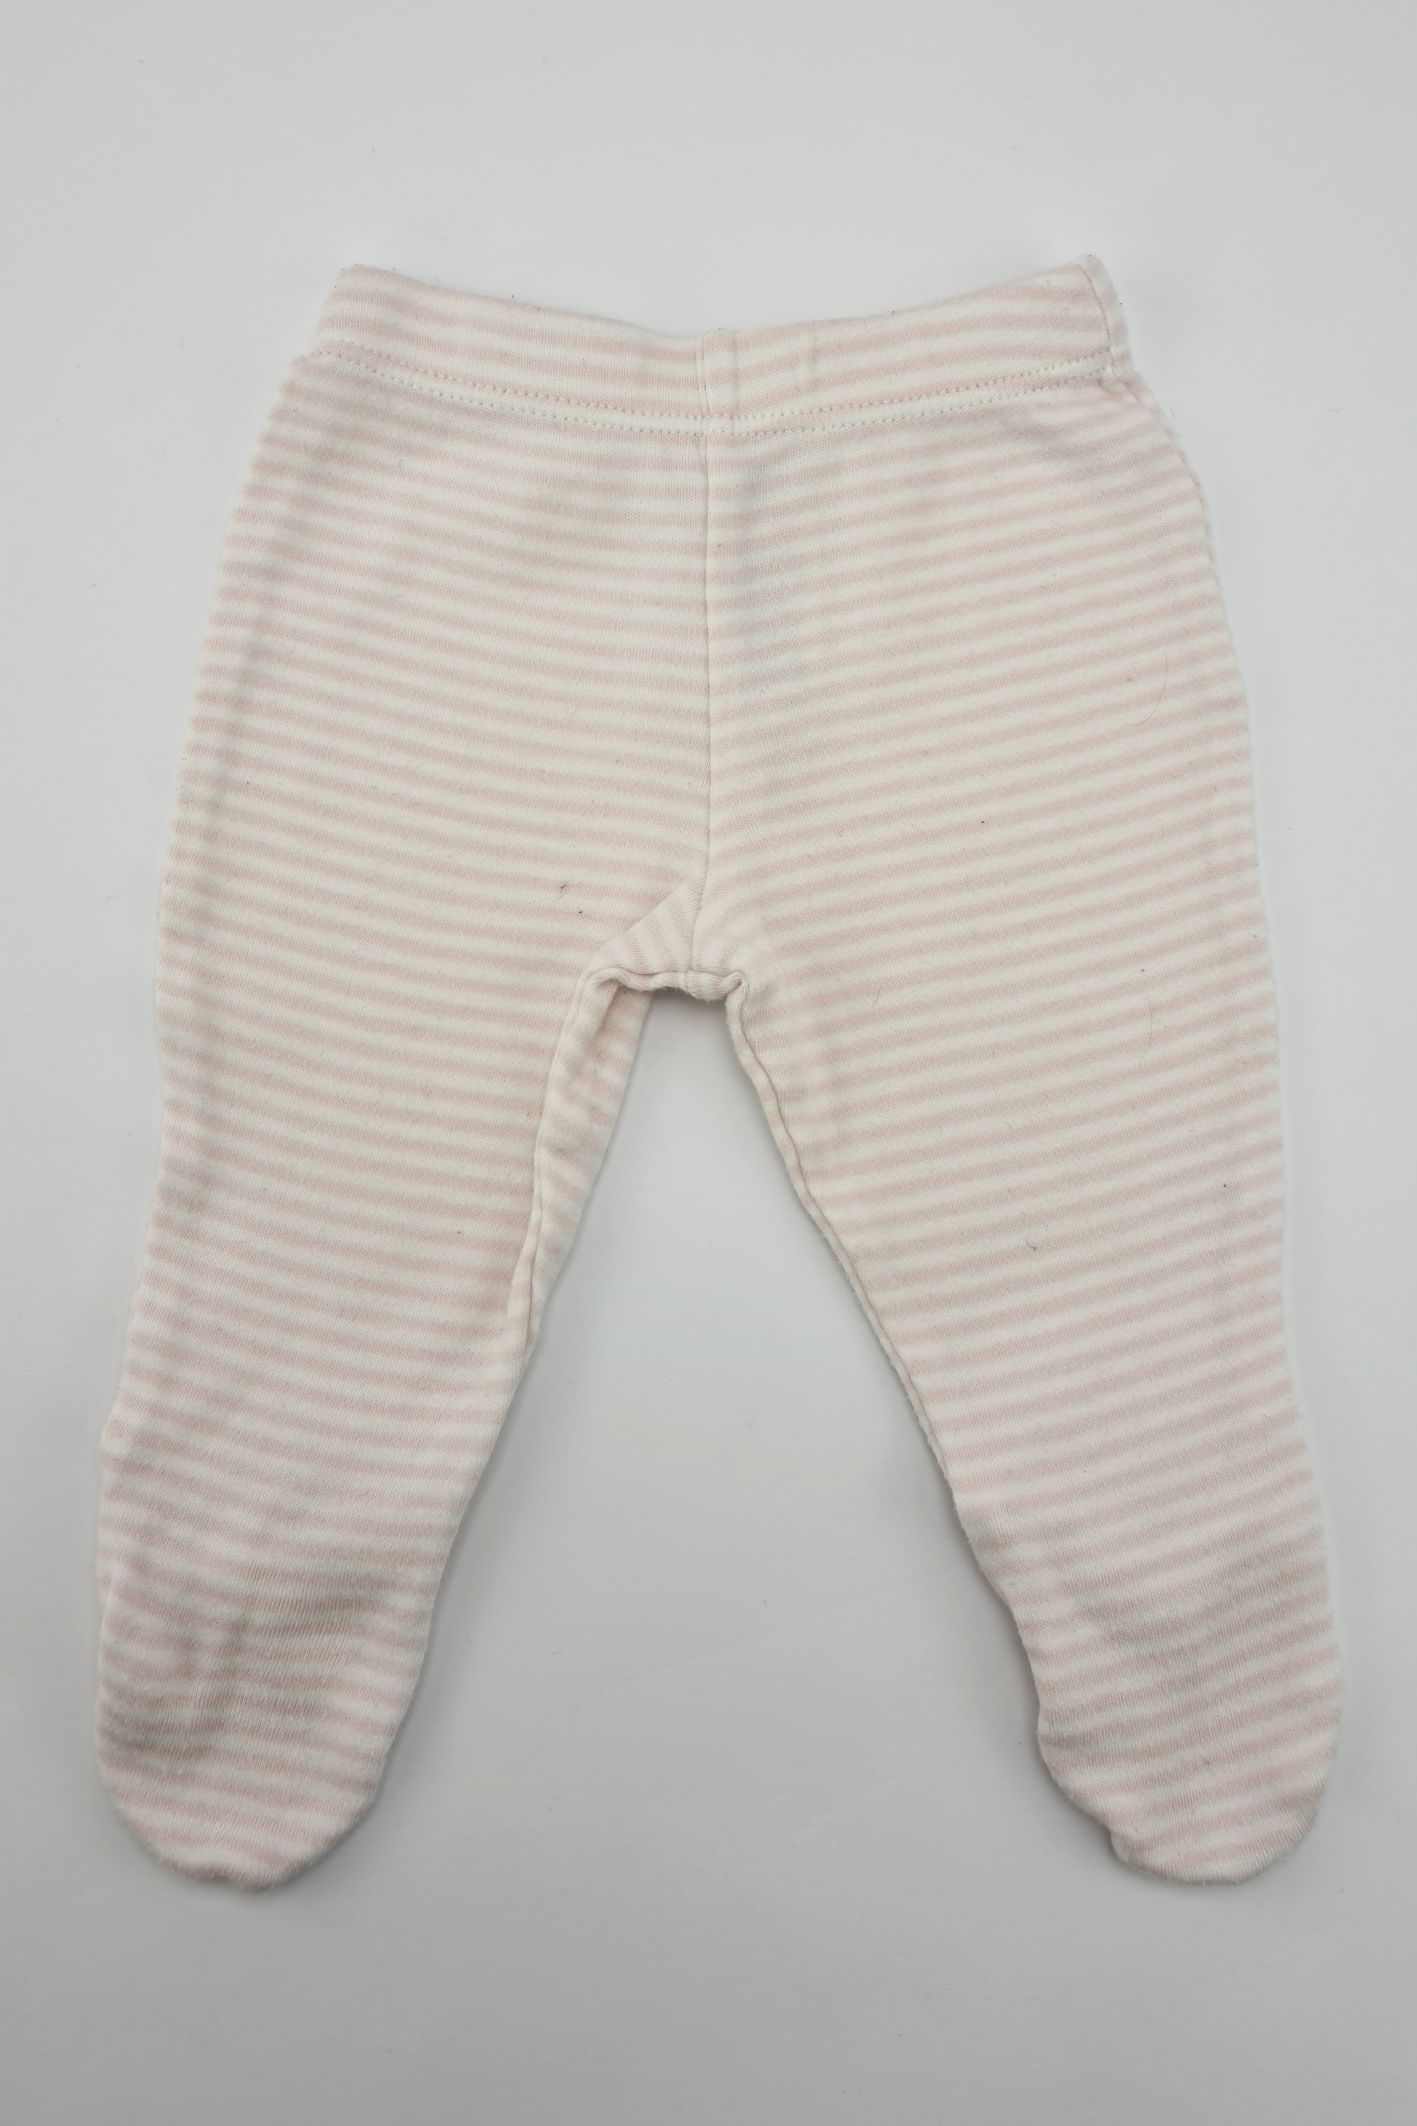 1 Month (9lbs) - Pink & White Striped Footed Leggings (M&S)